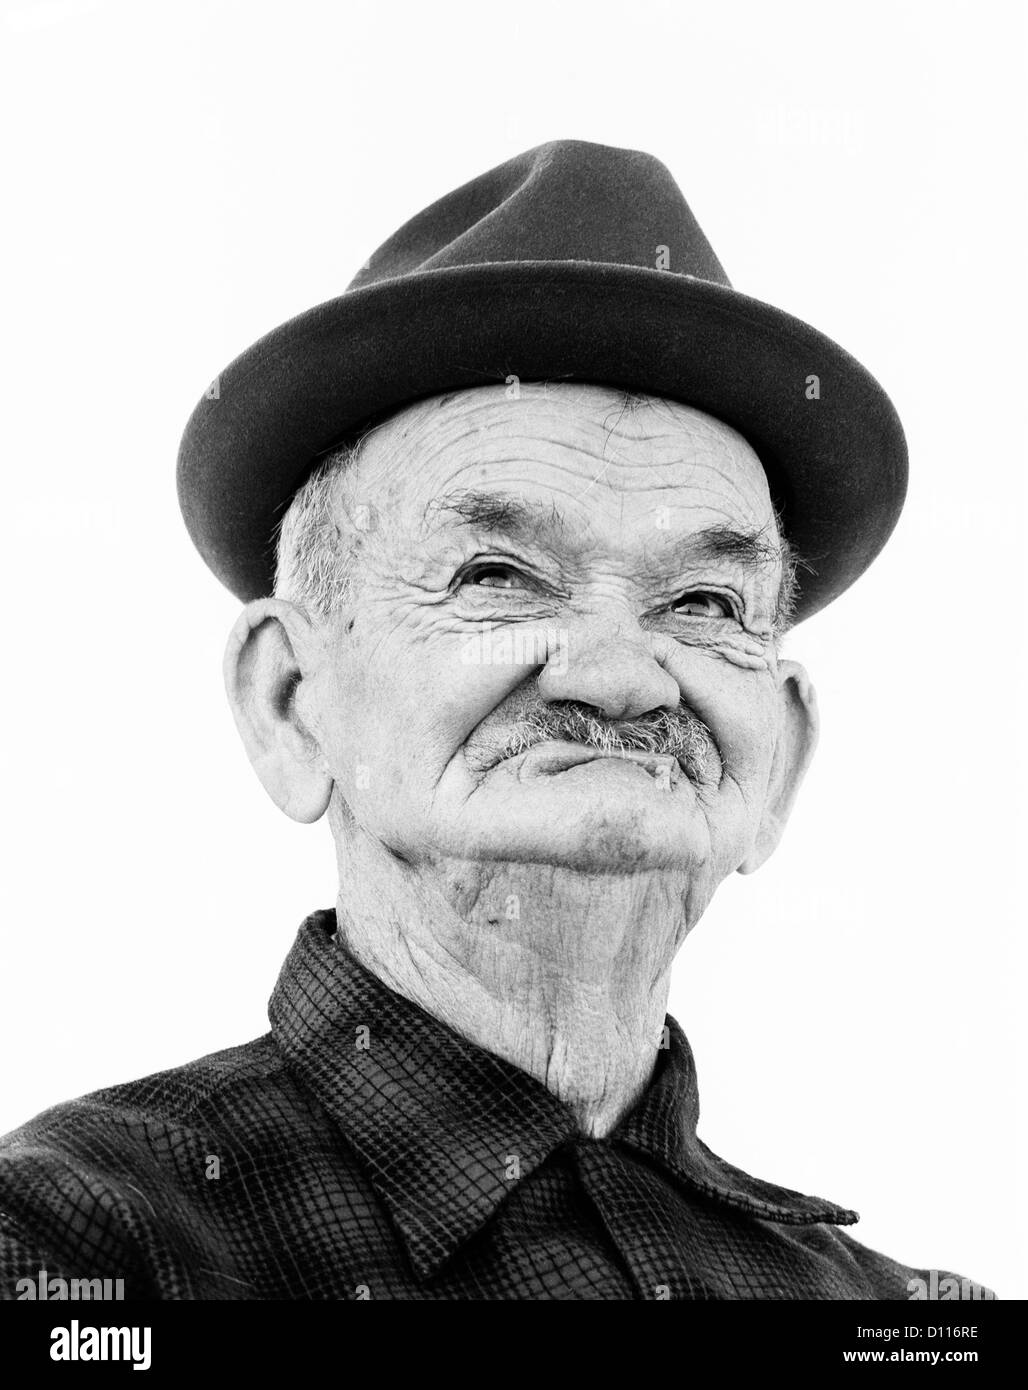 1970s PORTRAIT ELDERLY WRINKLED MAN WEARING FUNNY TOOTHLESS SMILE FACIAL EXPRESSION Stock Photo